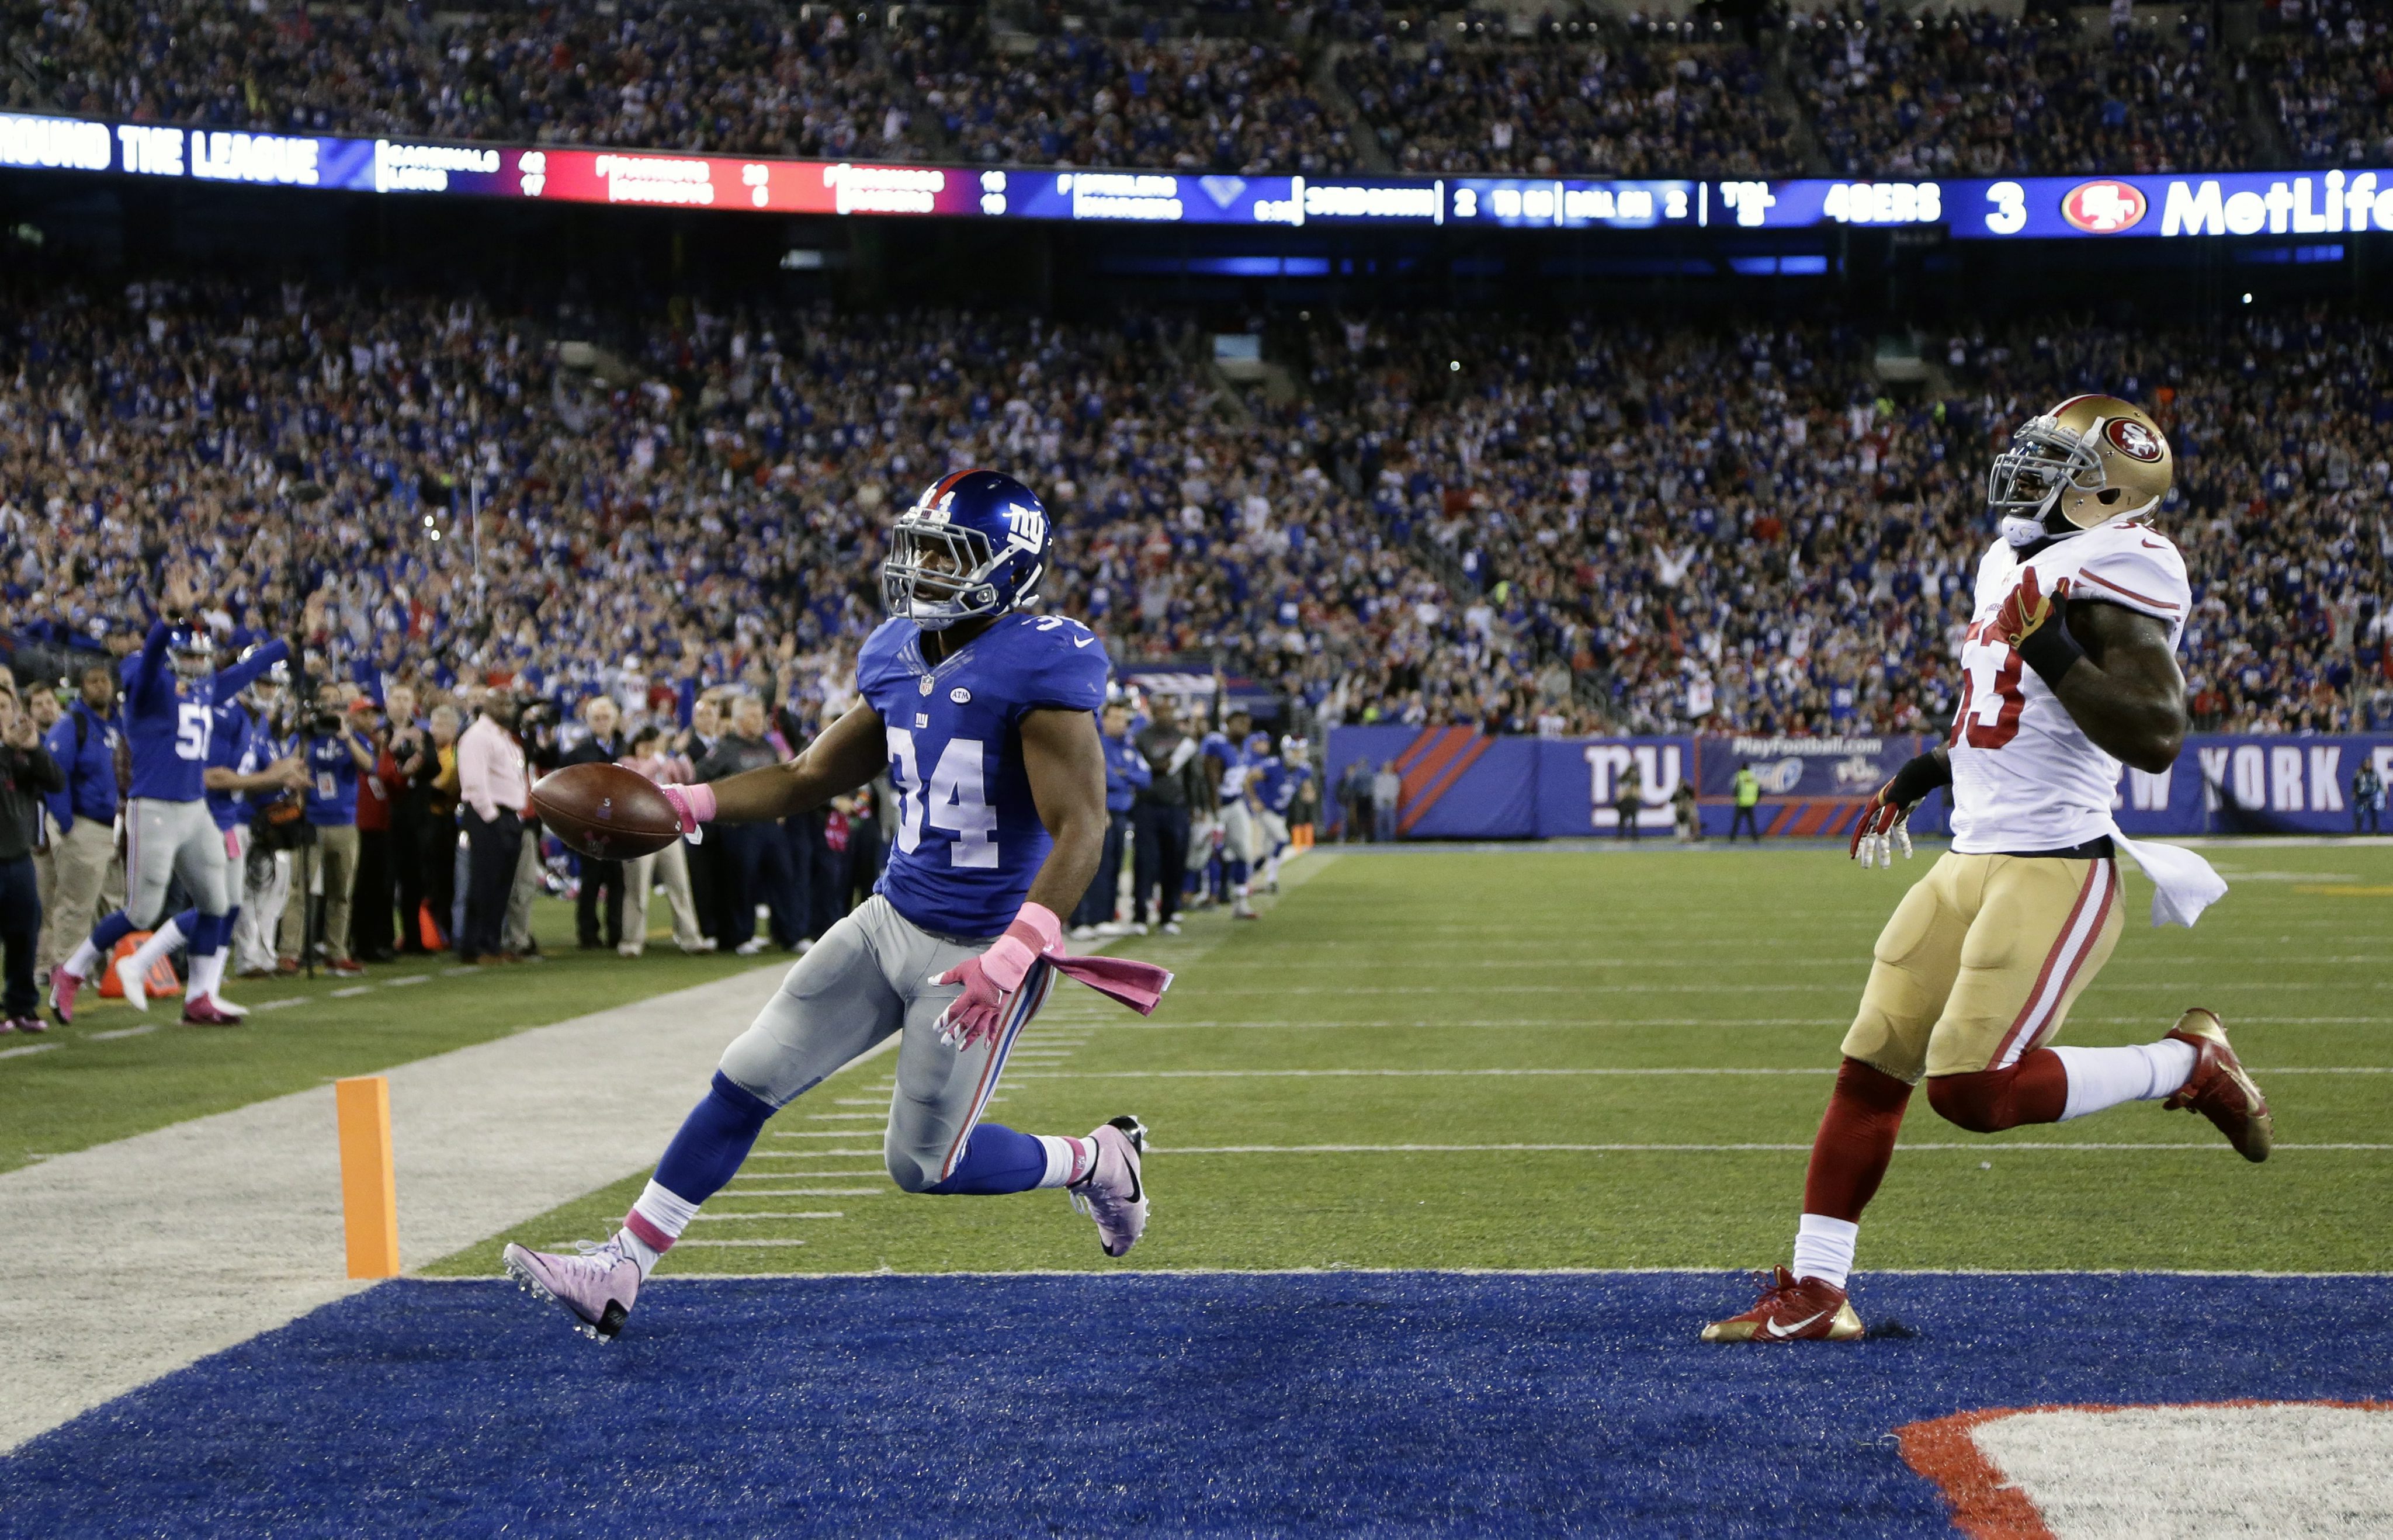 2015-10-11 21:05:25 epa04974408 New York Giants running back Shane Vereen (L) celebrates as he runs into the end zone for a touch down past San Francisco 49ers inside linebacker NaVorro Bowman in the second quarter of their NFL game at MetLife Stadium in East Rutherford, New Jersey, USA, 11 October 2015. EPA/JASON SZENES